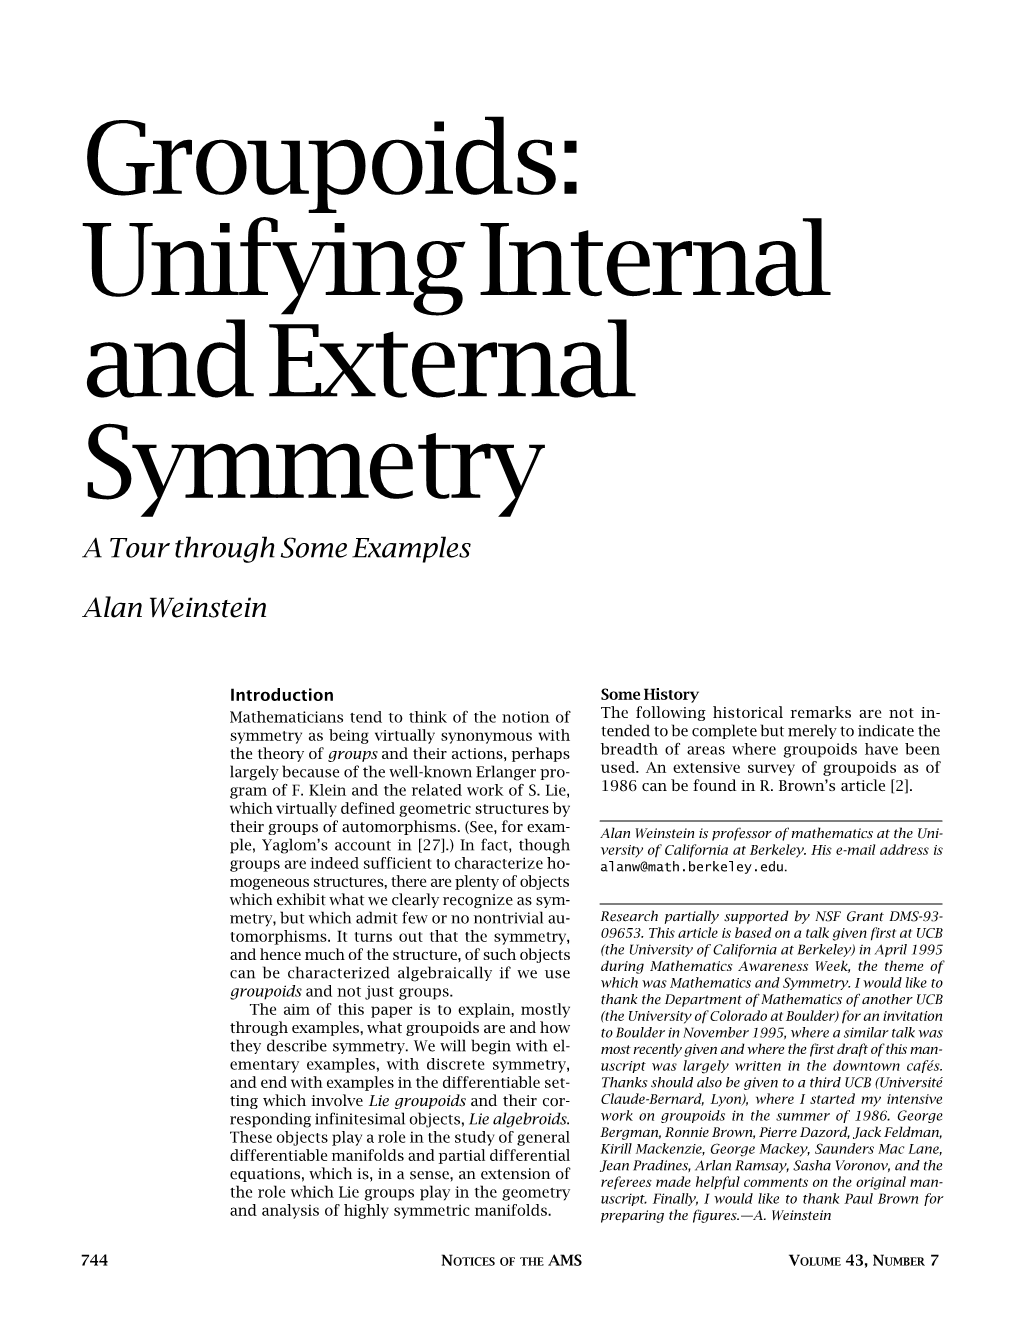 Groupoids: Unifying Internal and External Symmetry a Tour Through Some Examples